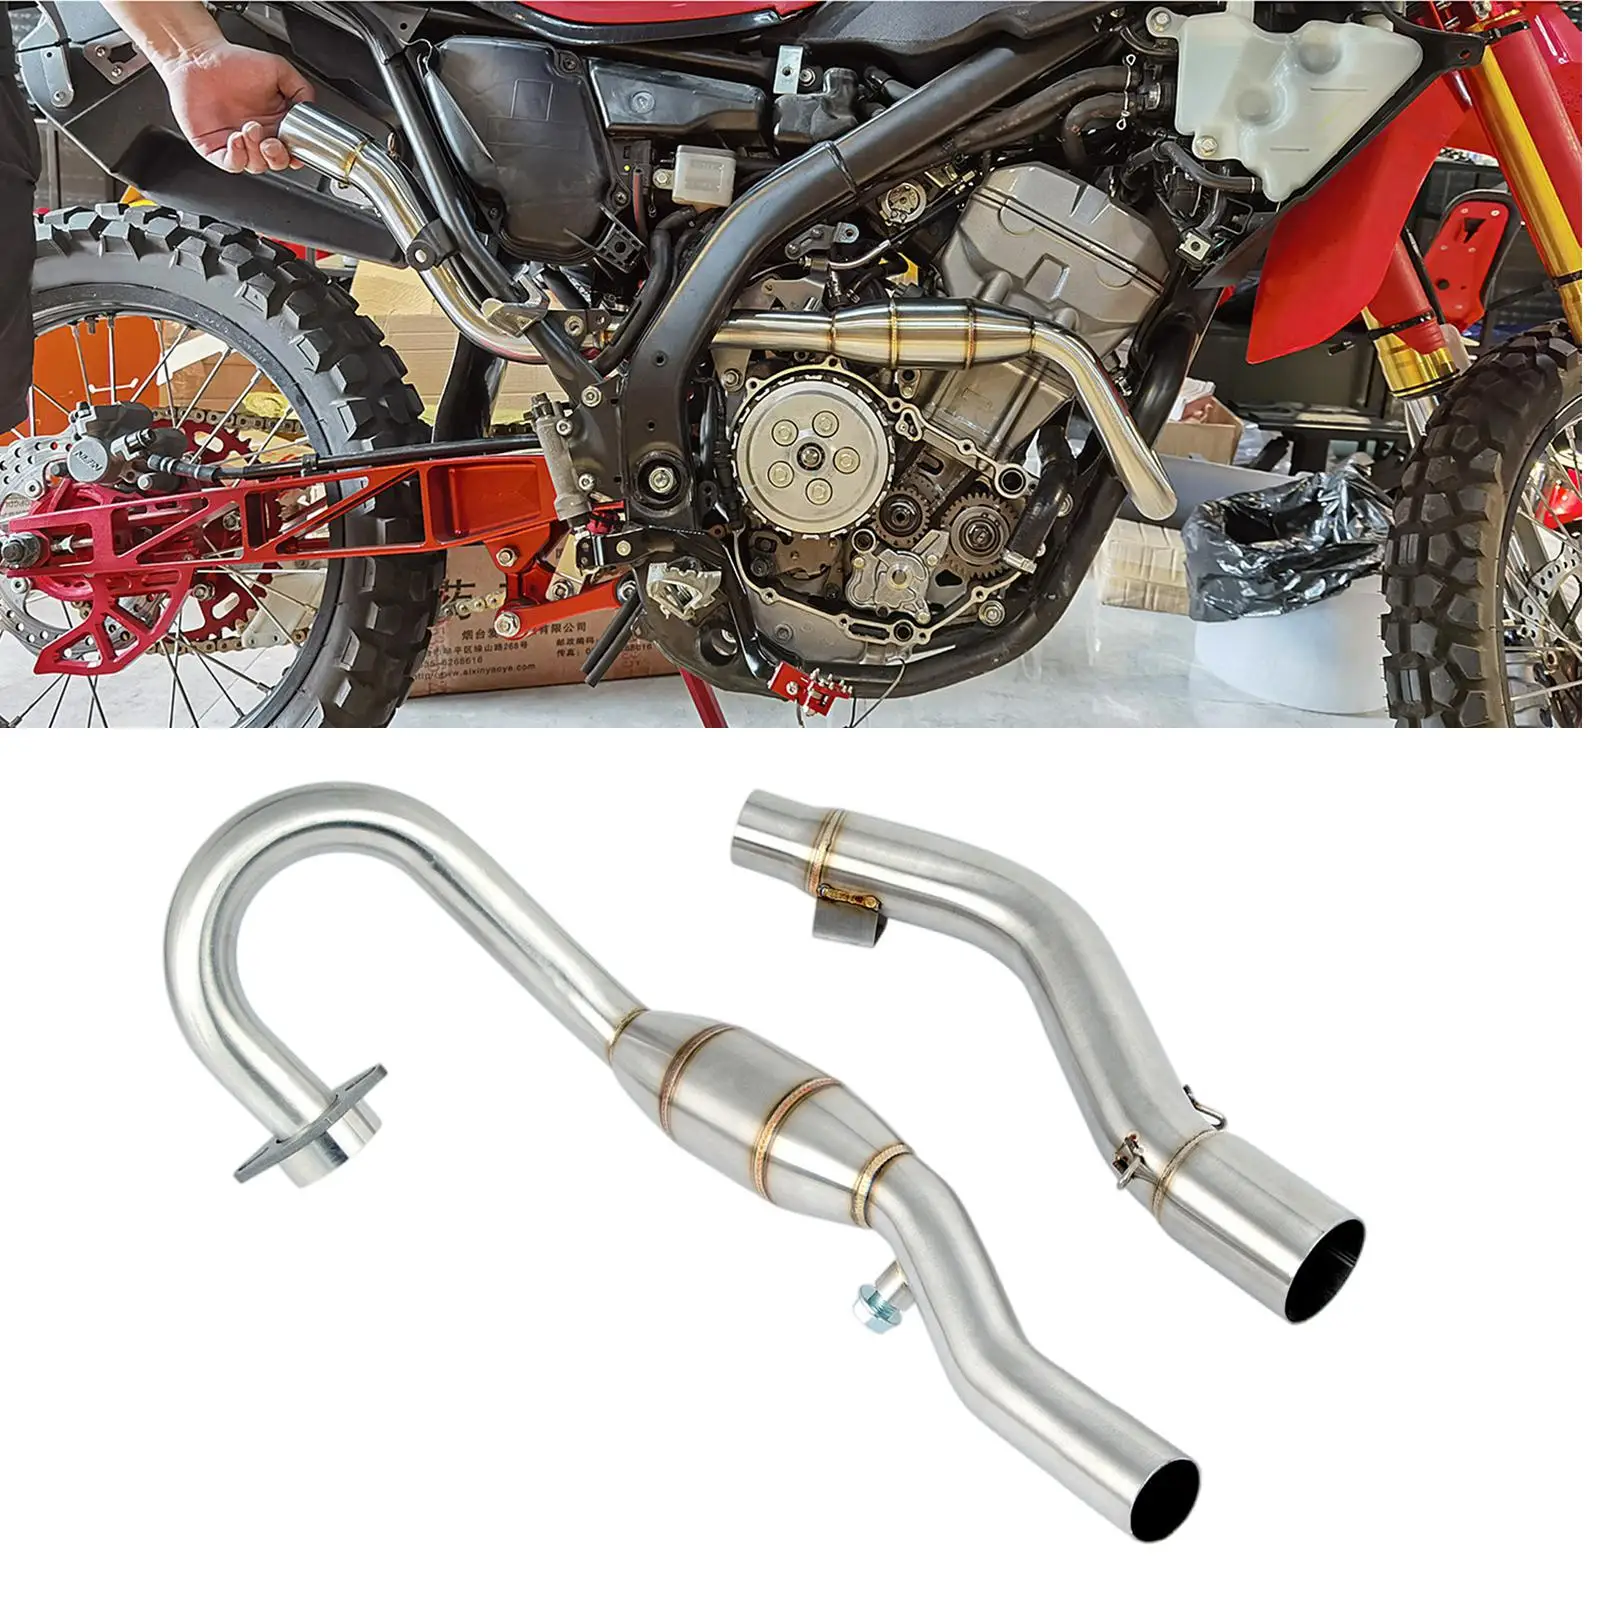 Mid Exhaust Pipe Slip on Front Middle mm Pipe Header Fit for